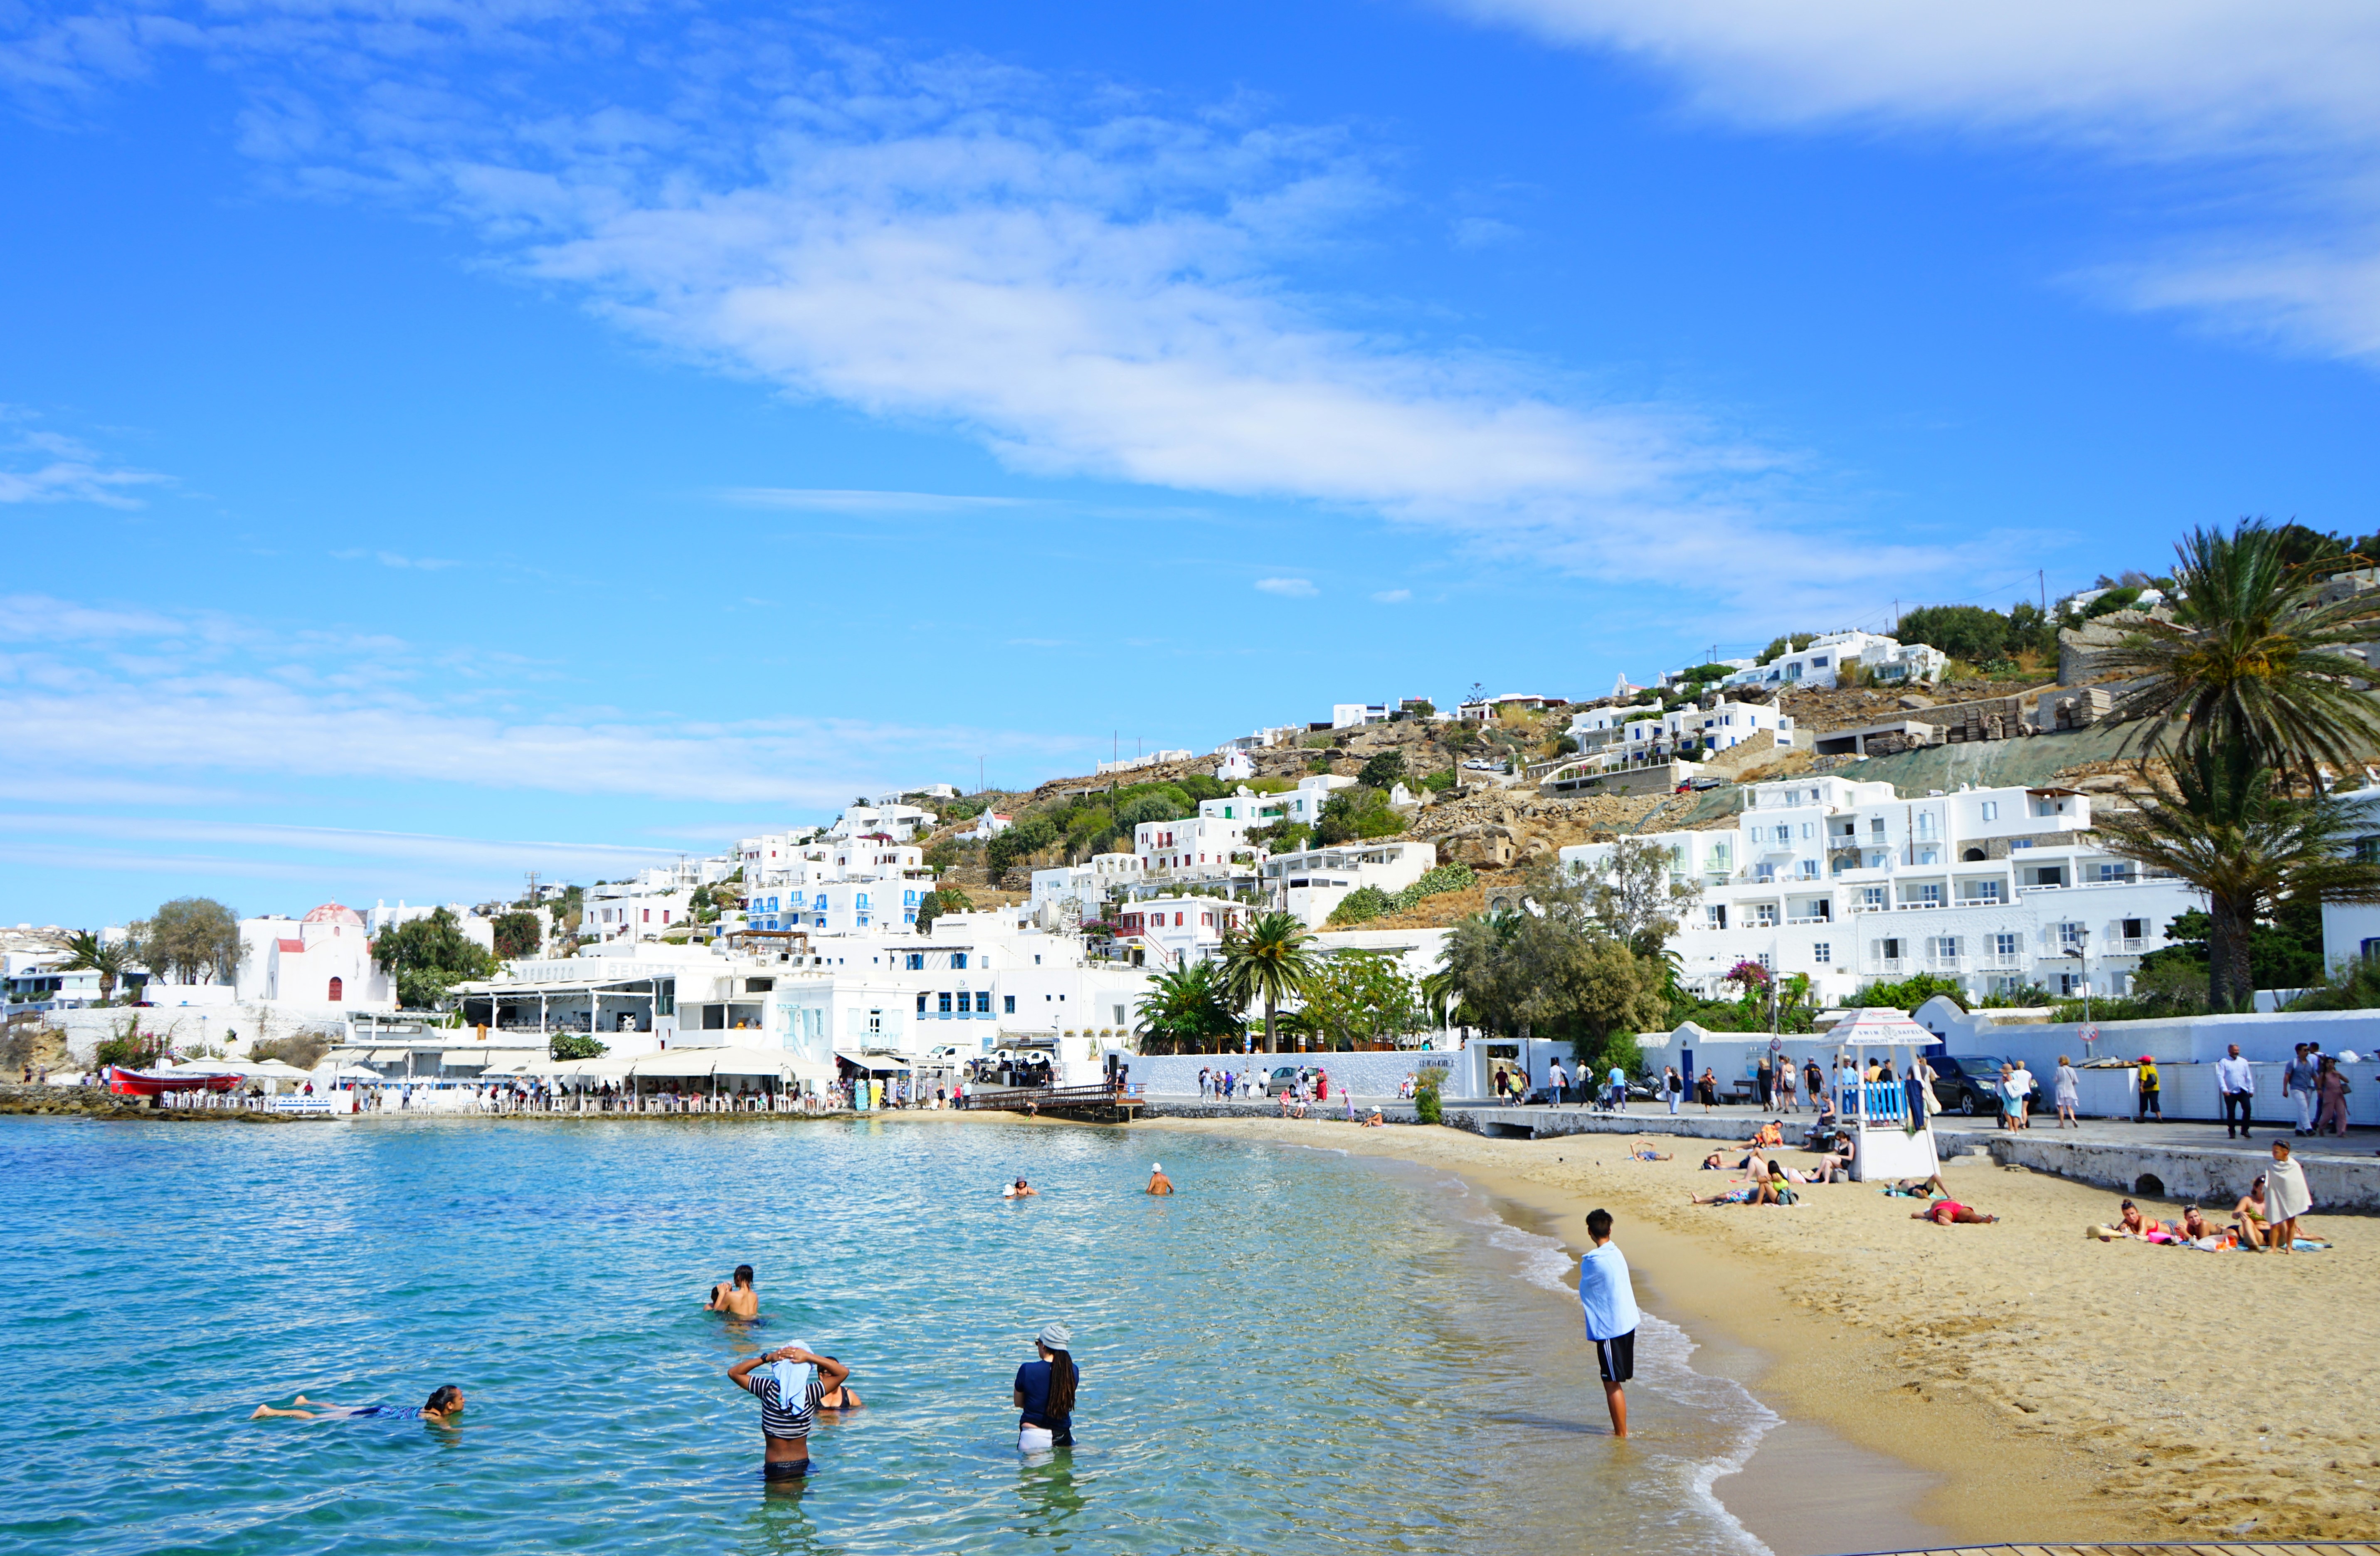 Beach at the Old Port in Mykonos